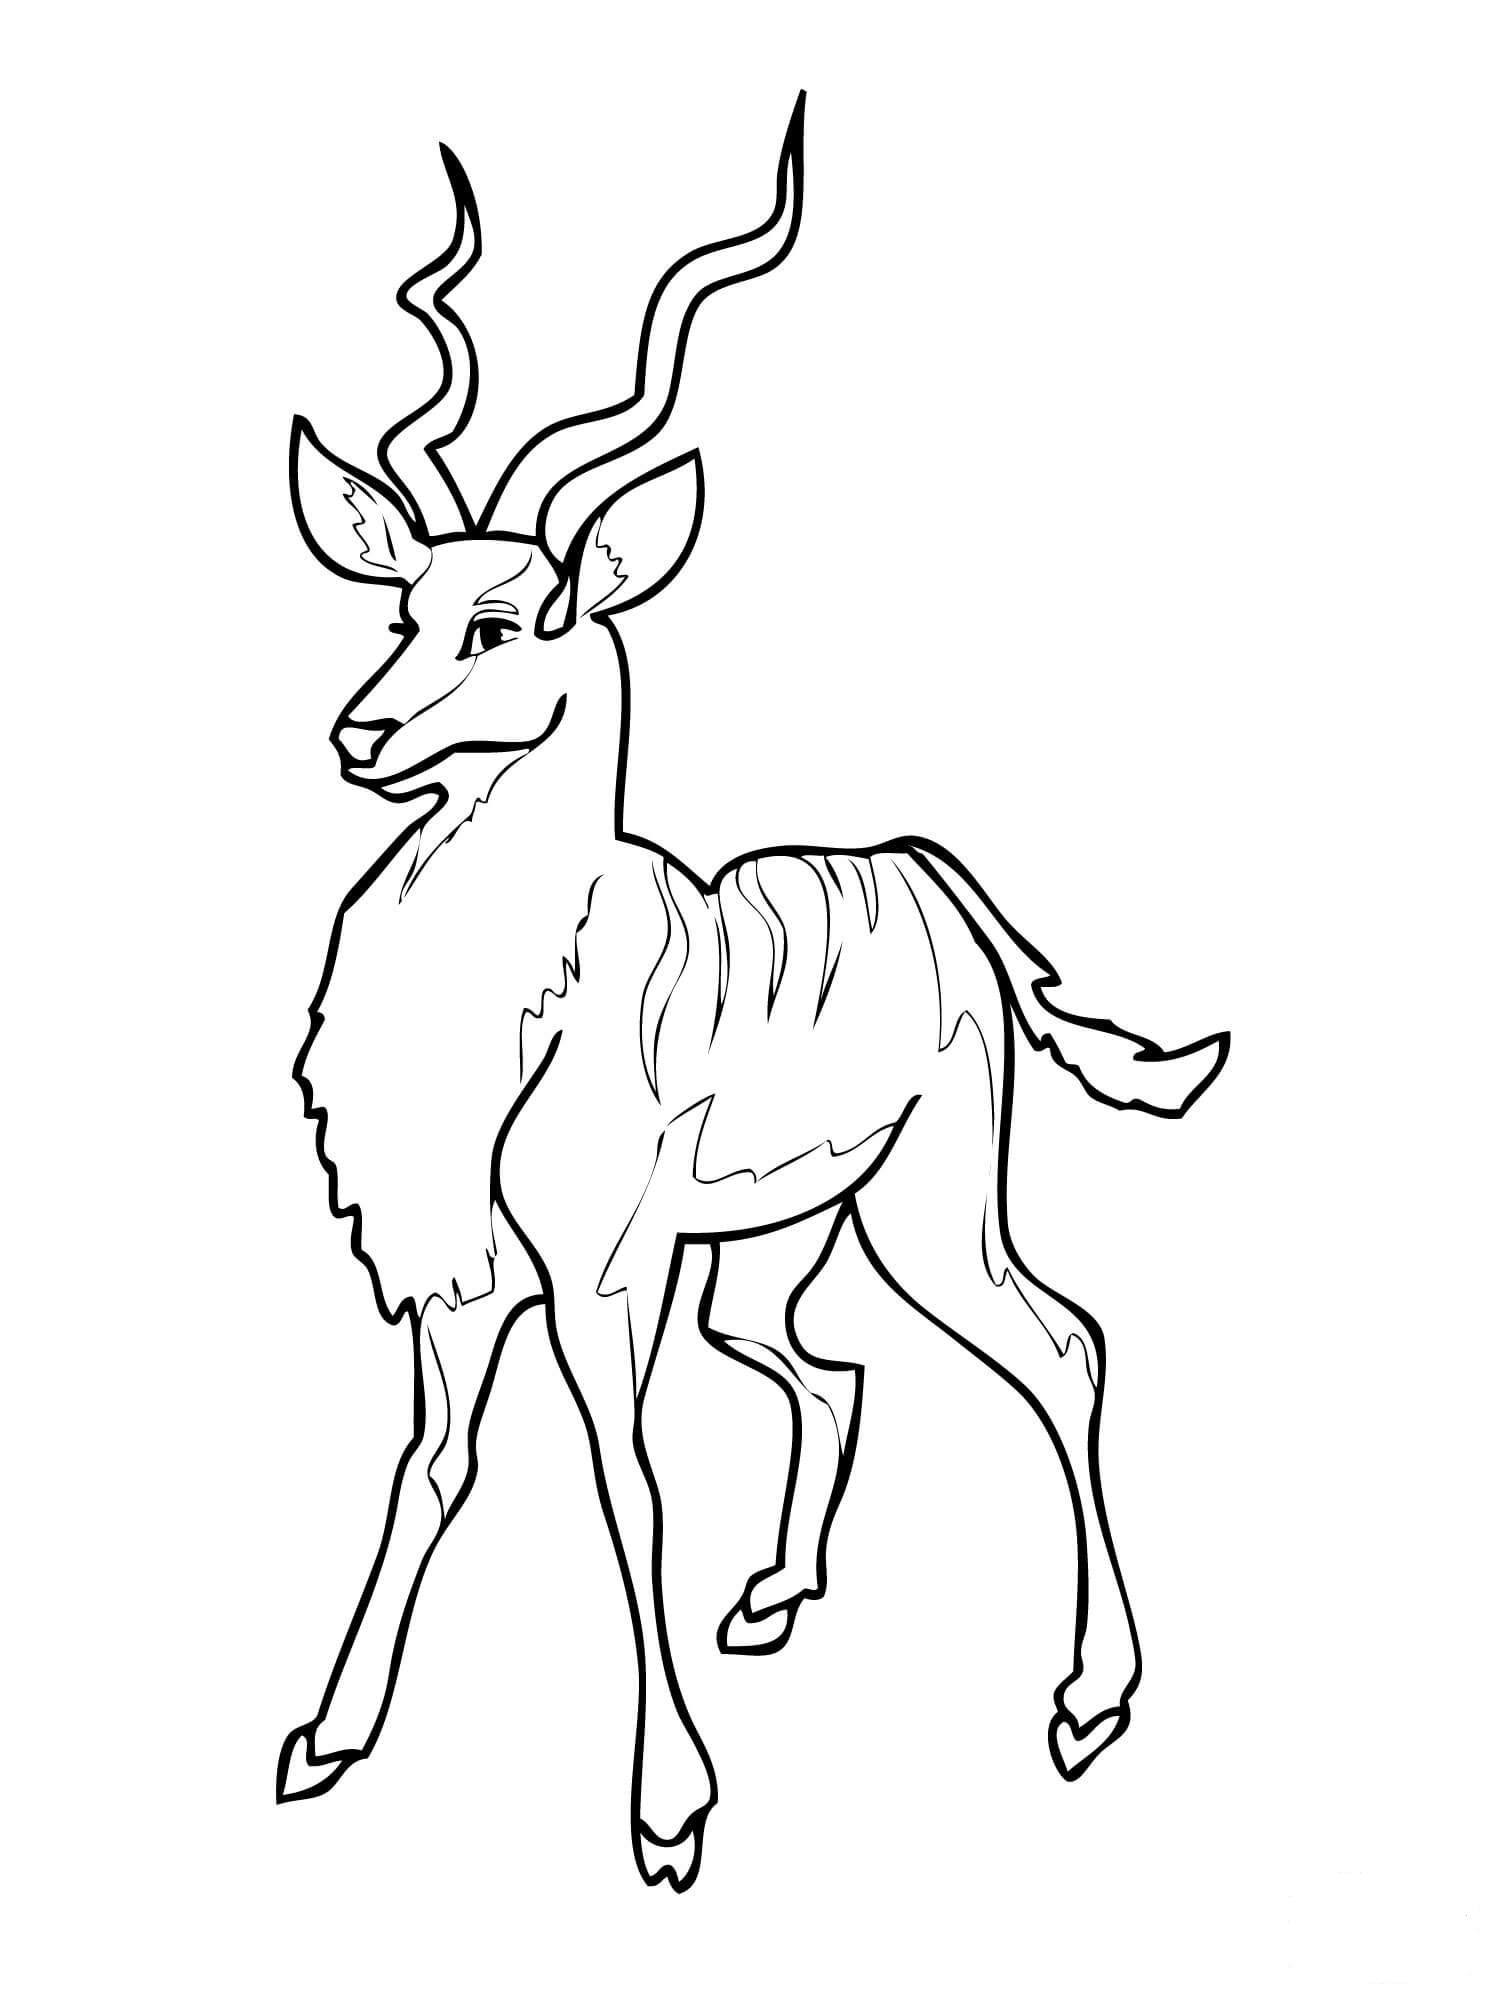 Antelope Coloring Pages to download and print for free